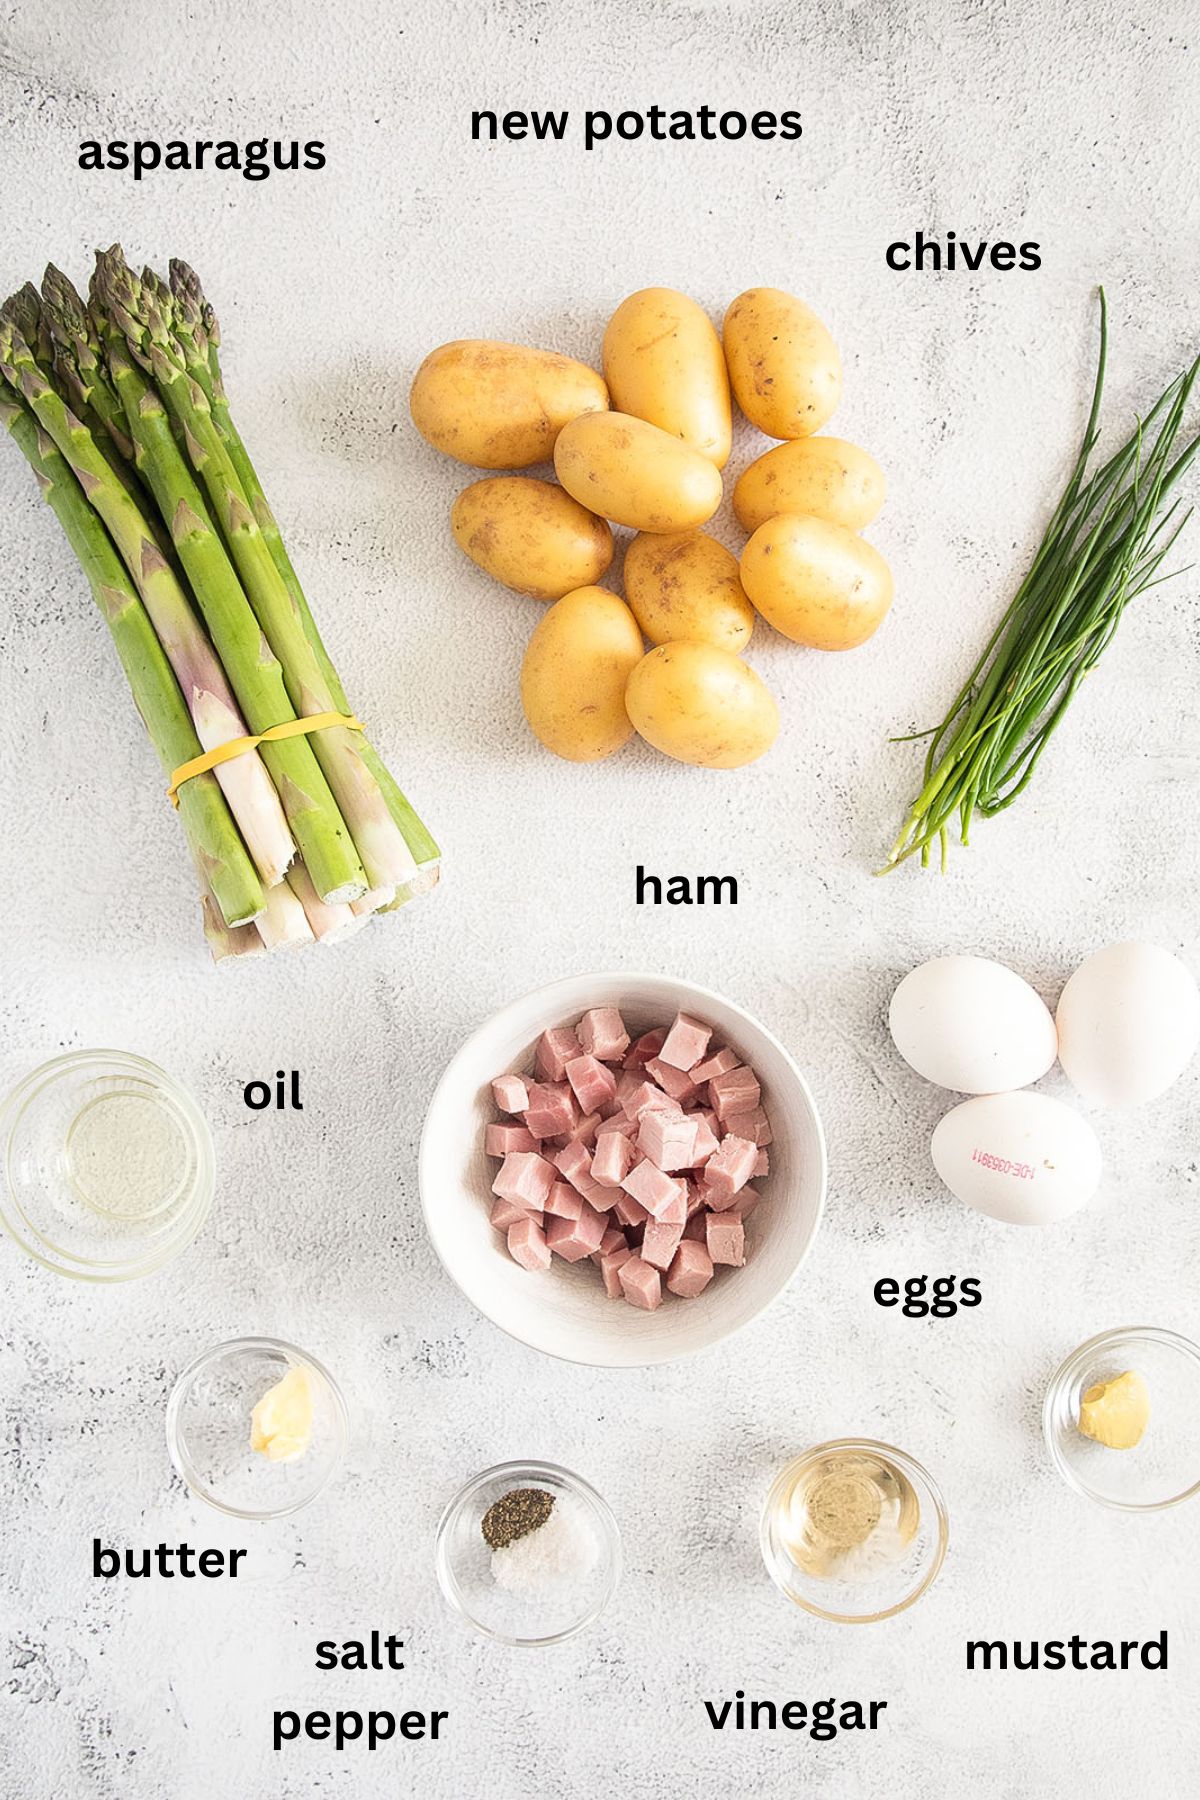 listed ingredients for making asparagus salad with potatoes, ham, eggs and chives.